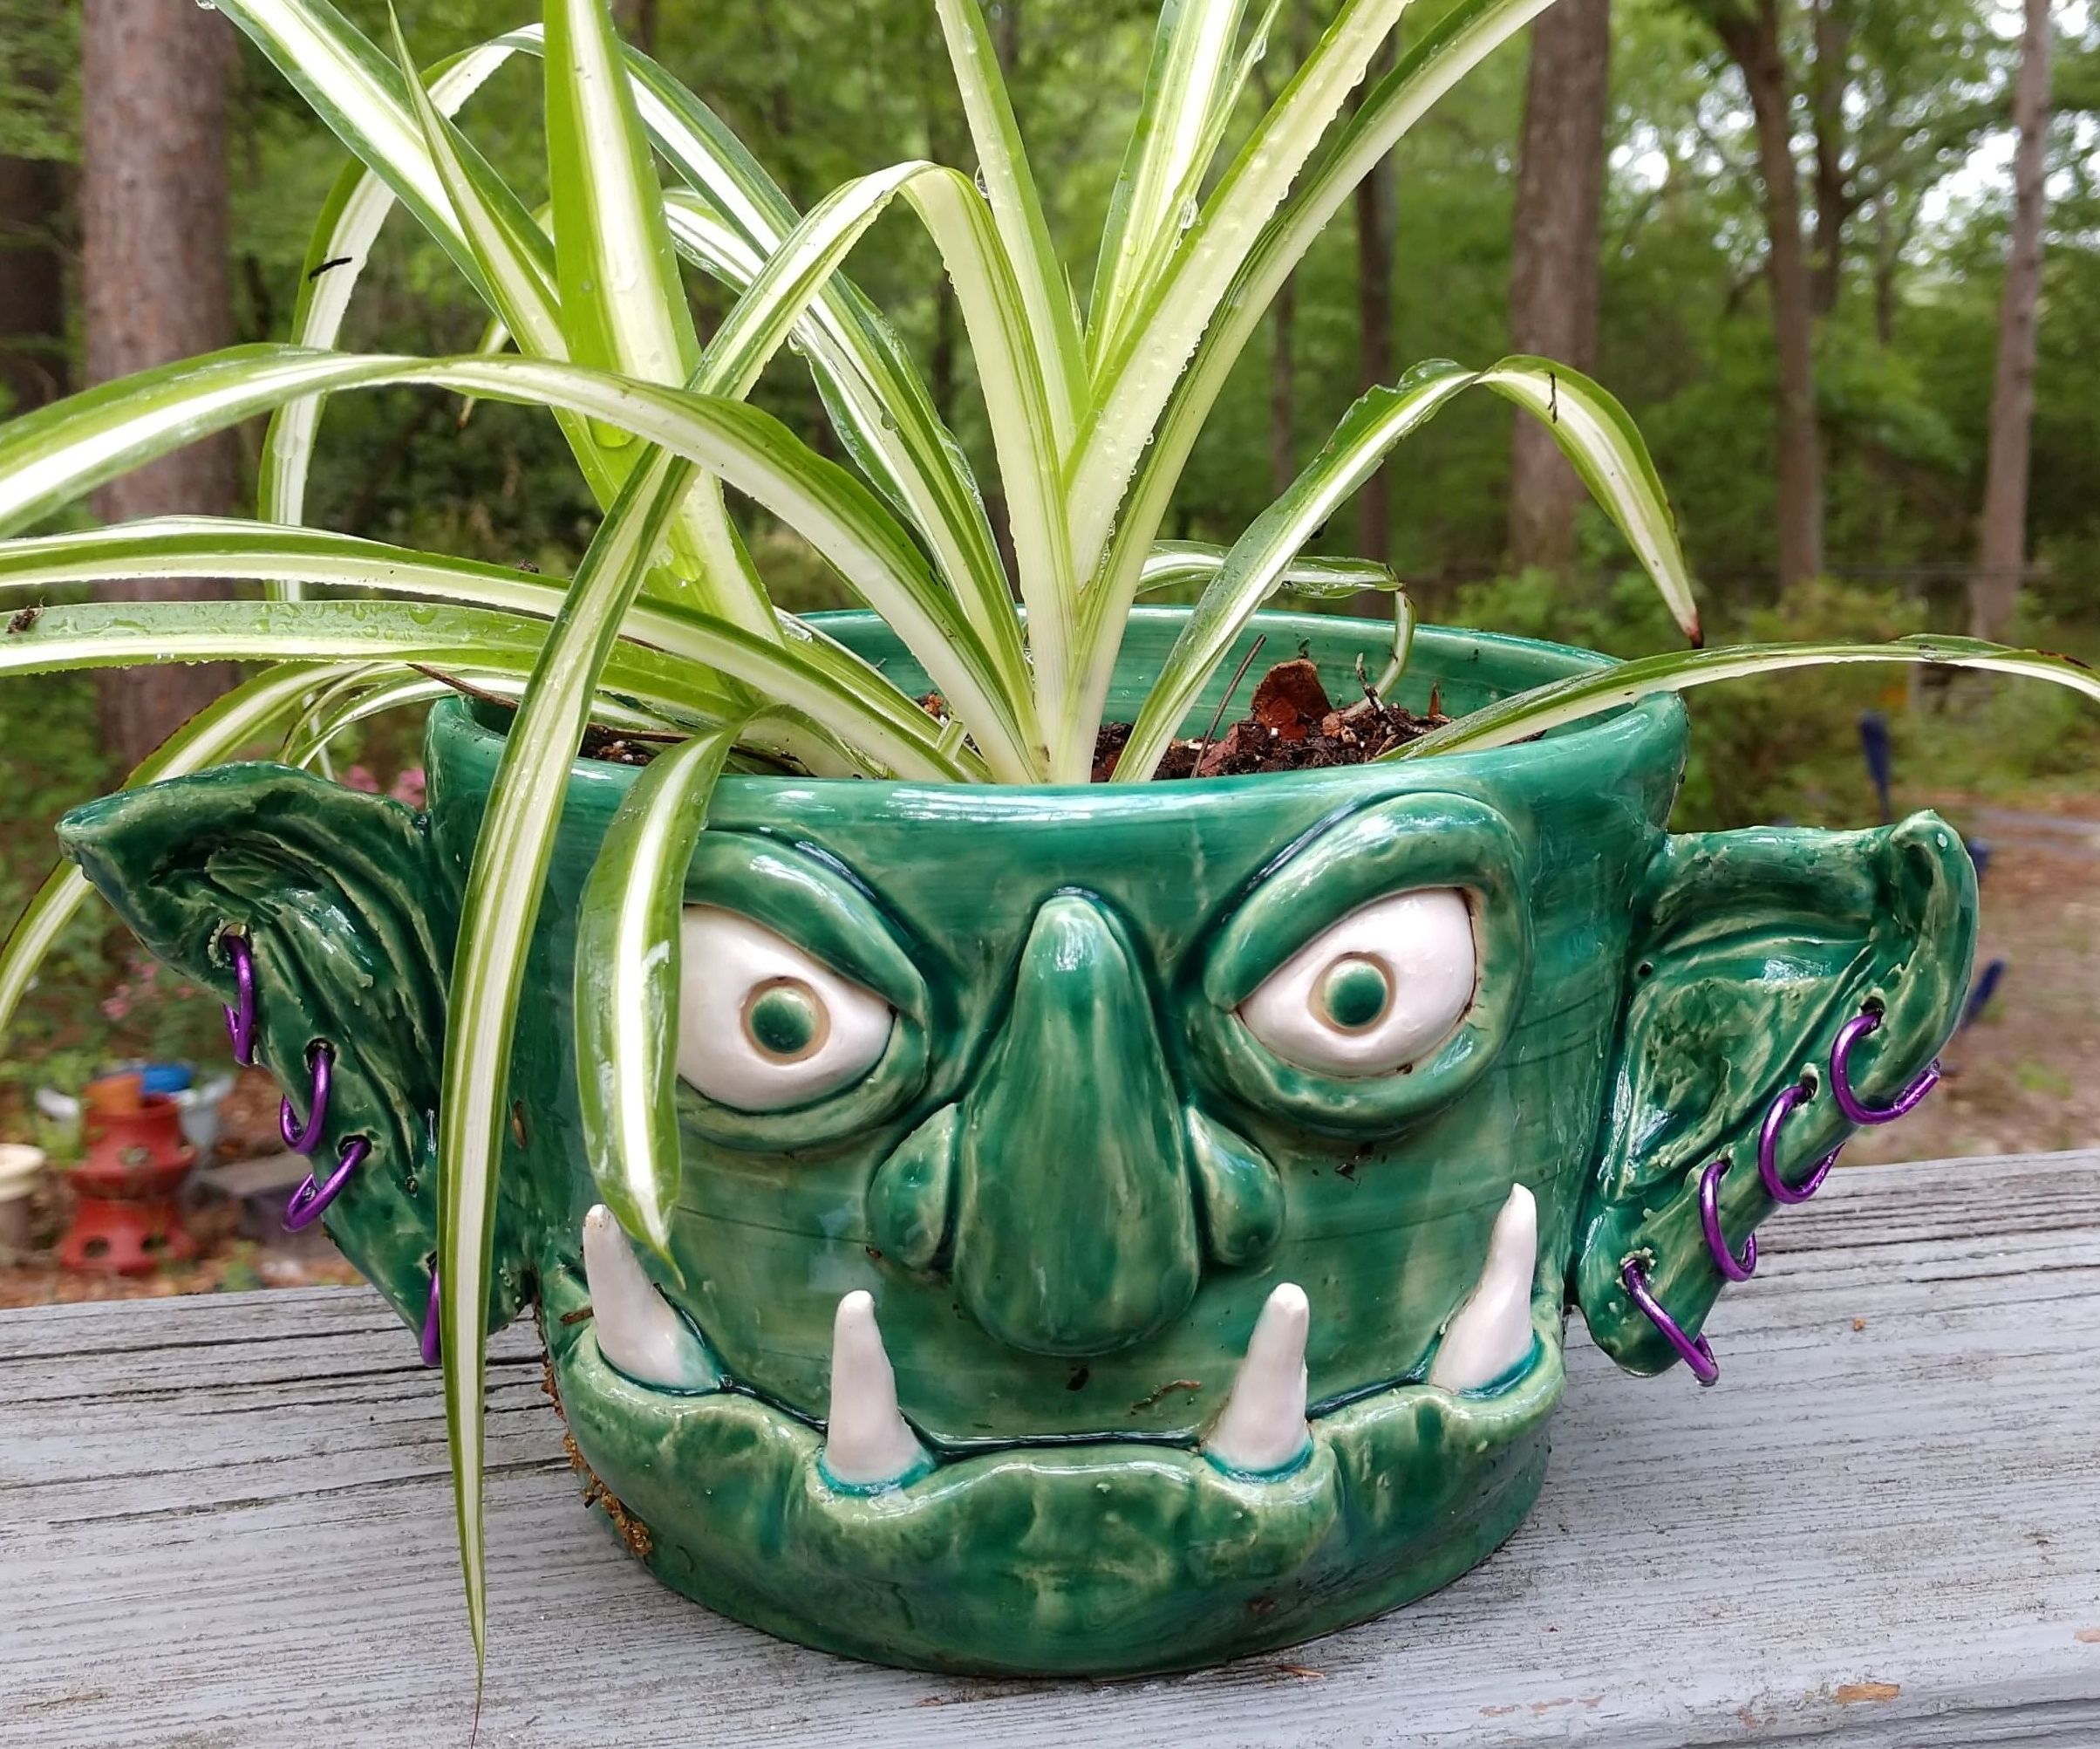 Pierced and Sculpted Goblin Planter Out of Clay